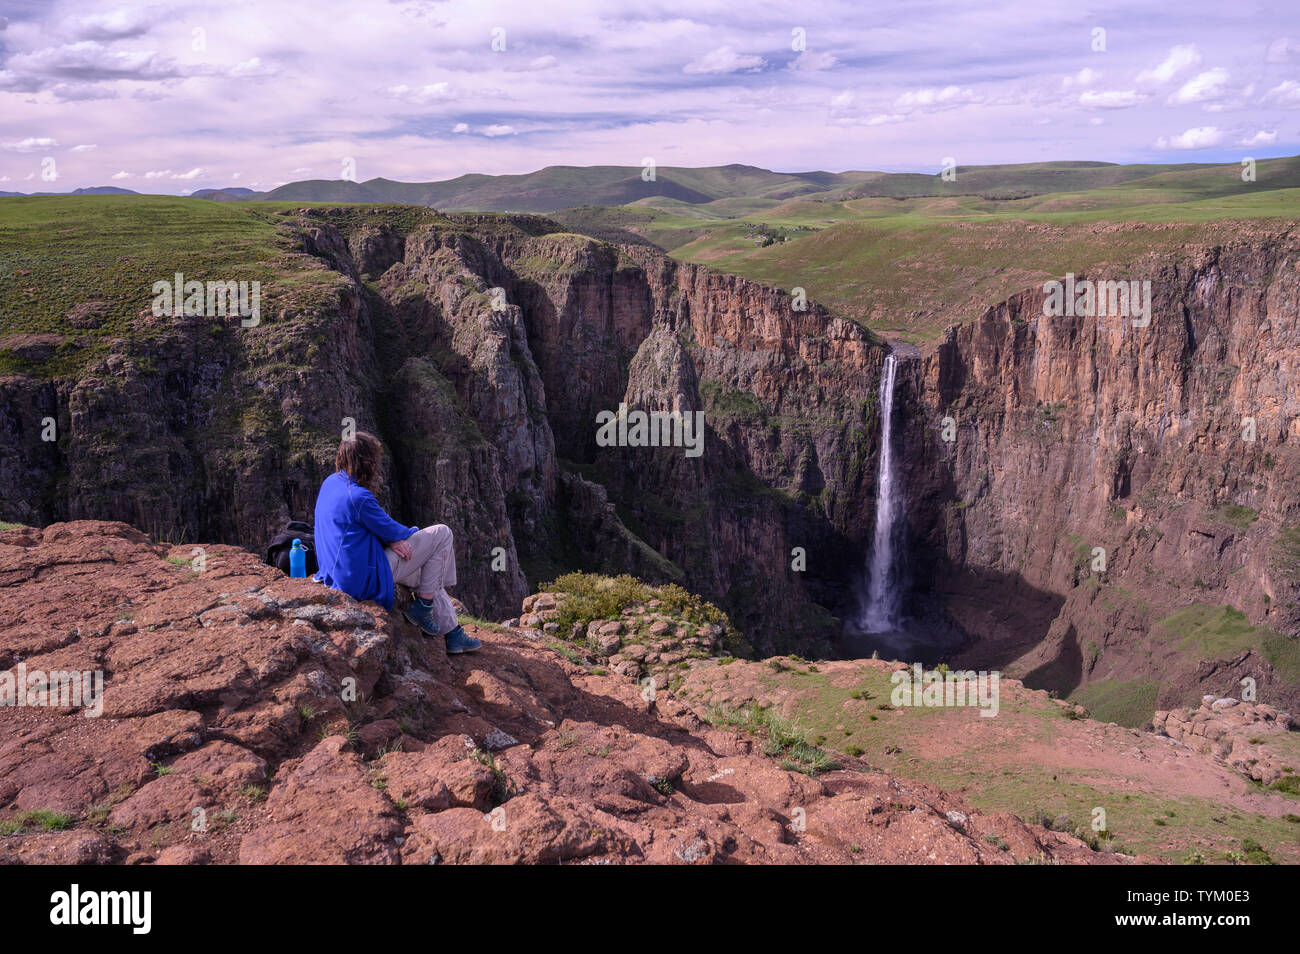 Africa; Southern Africa; Maseru District; Lesotho; Semonkong; Stock Photo